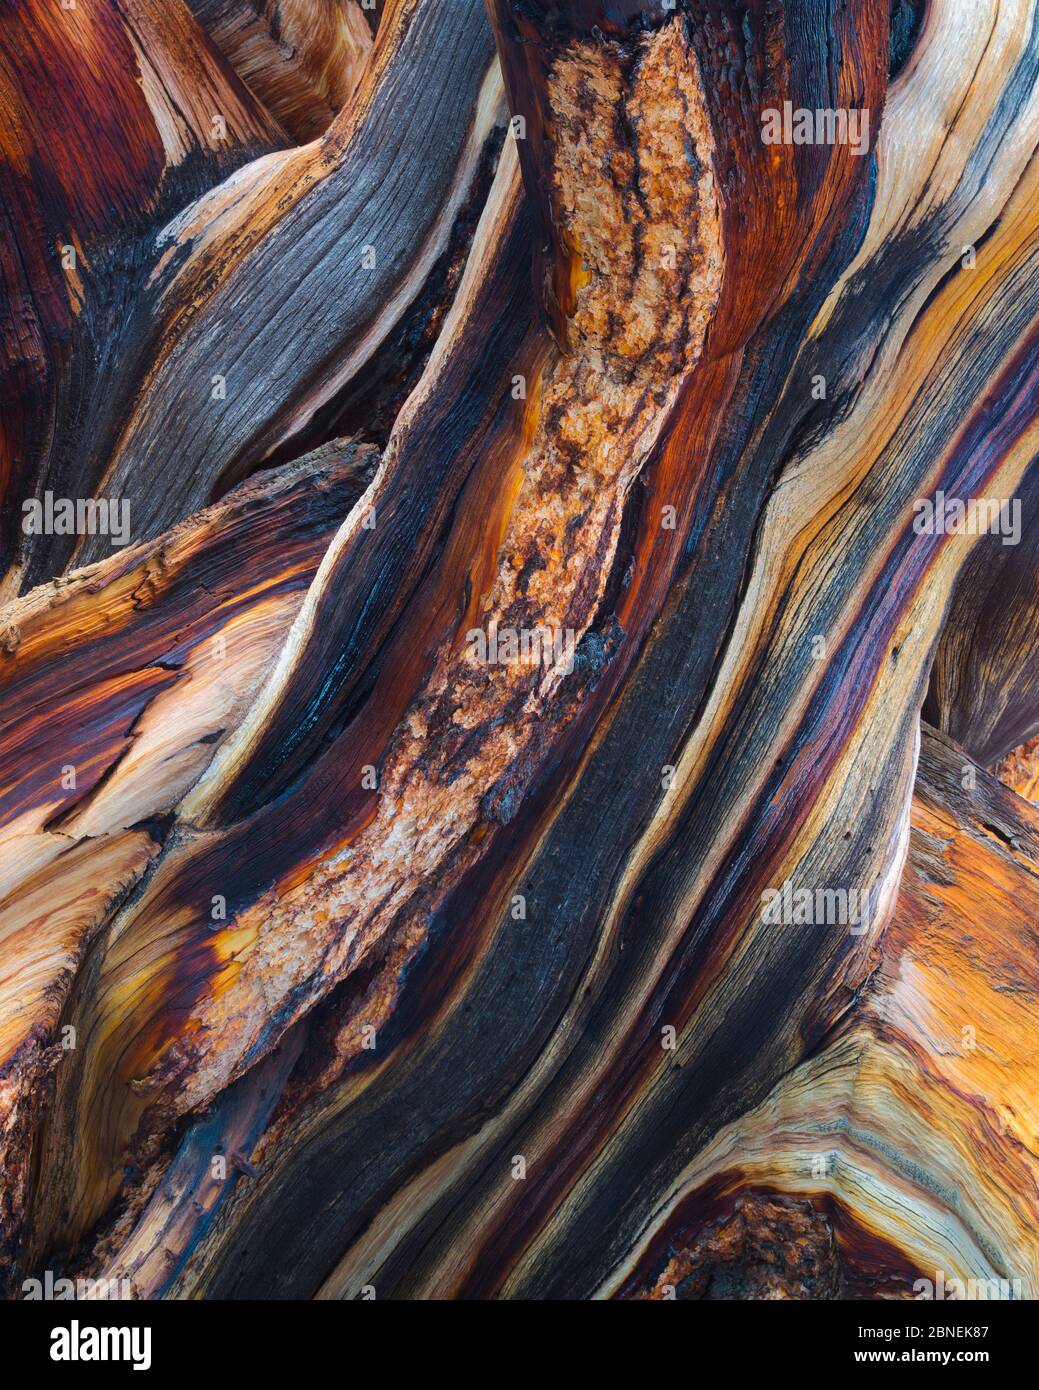 Bristlecone pine (Pinus aristata) abstract view of exposed and weathered wood layers, White Mountains, California, USA July Stock Photo